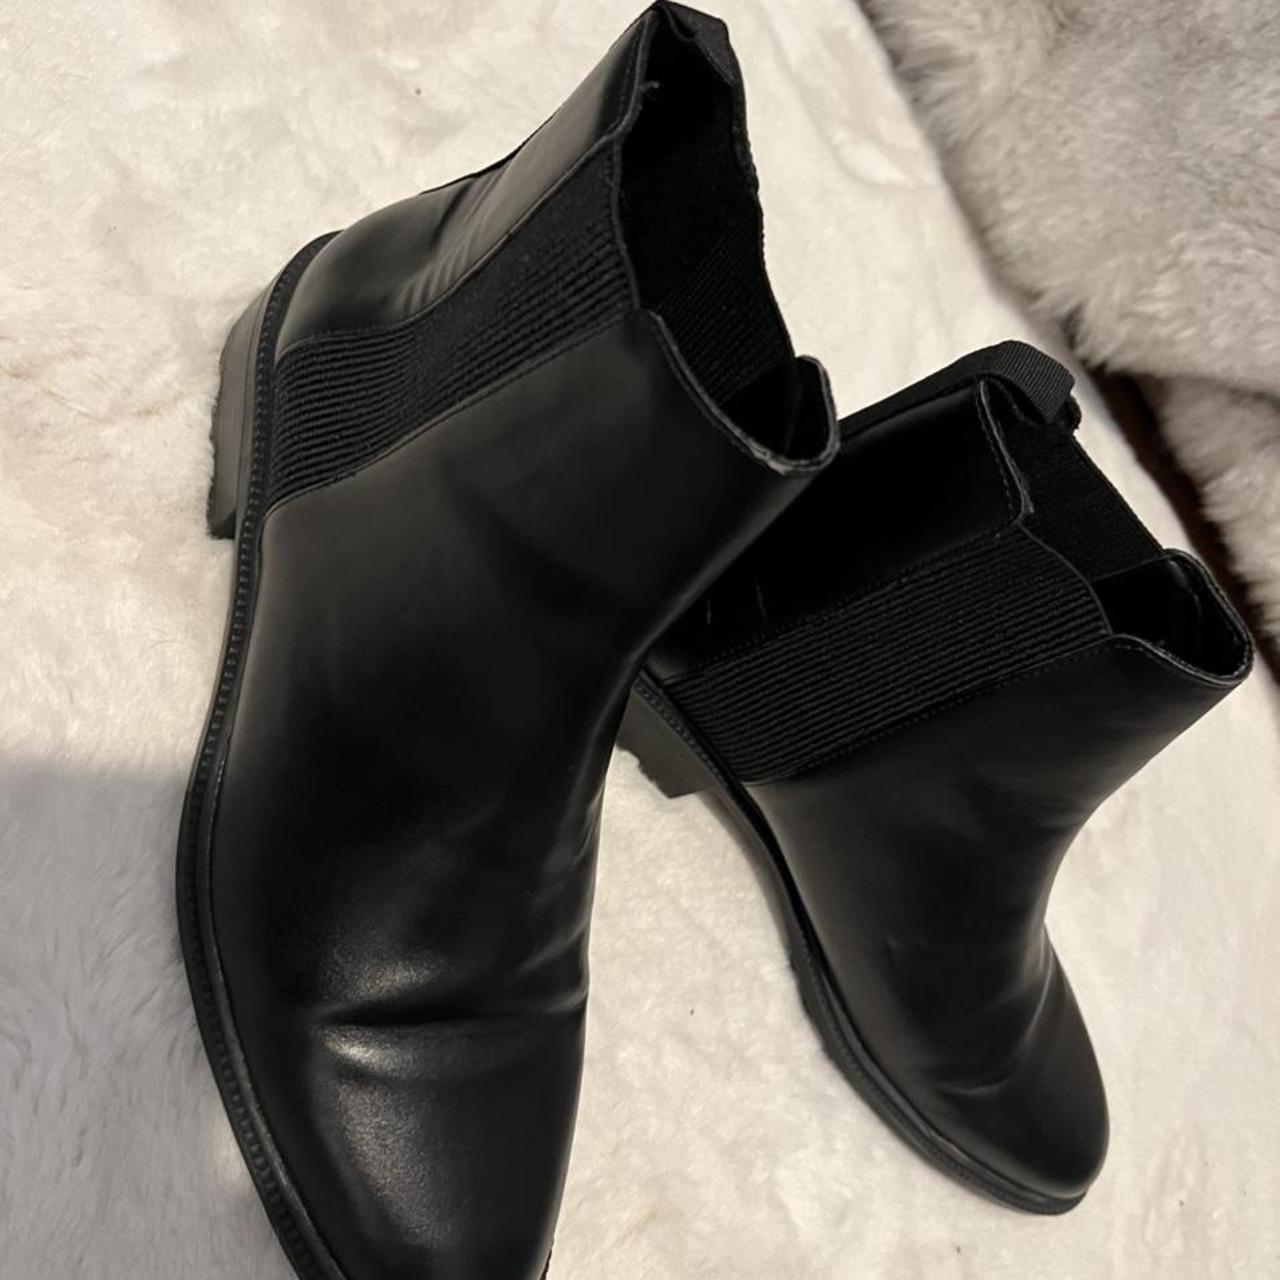 Black chelsea boots. Elastic gores on both sides and... - Depop